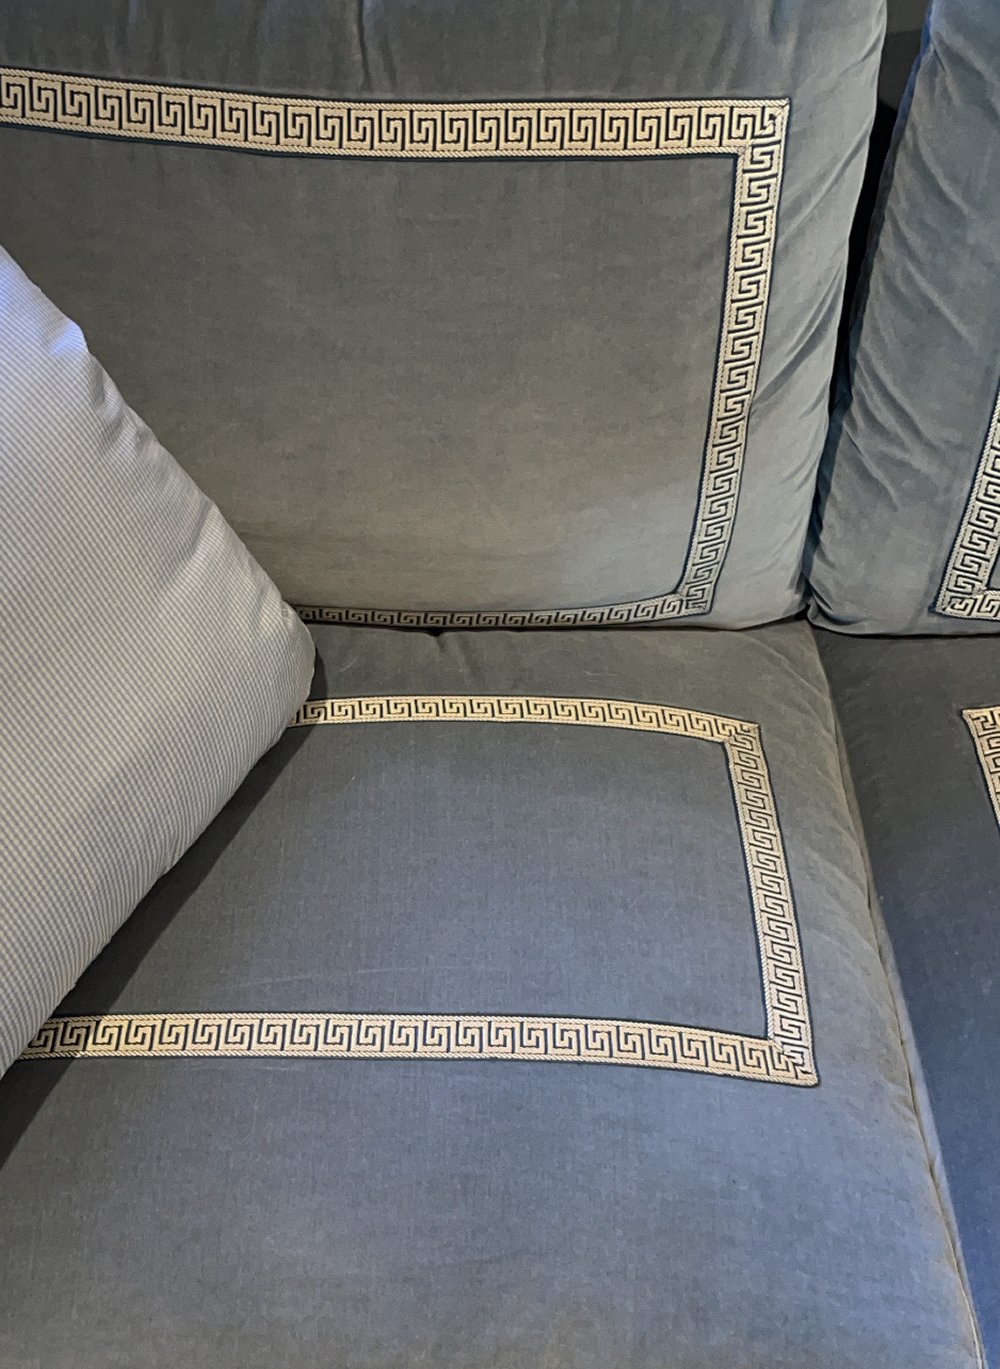 10 Things to Consider When Ordering Custom Upholstery - roomfortuesday.com